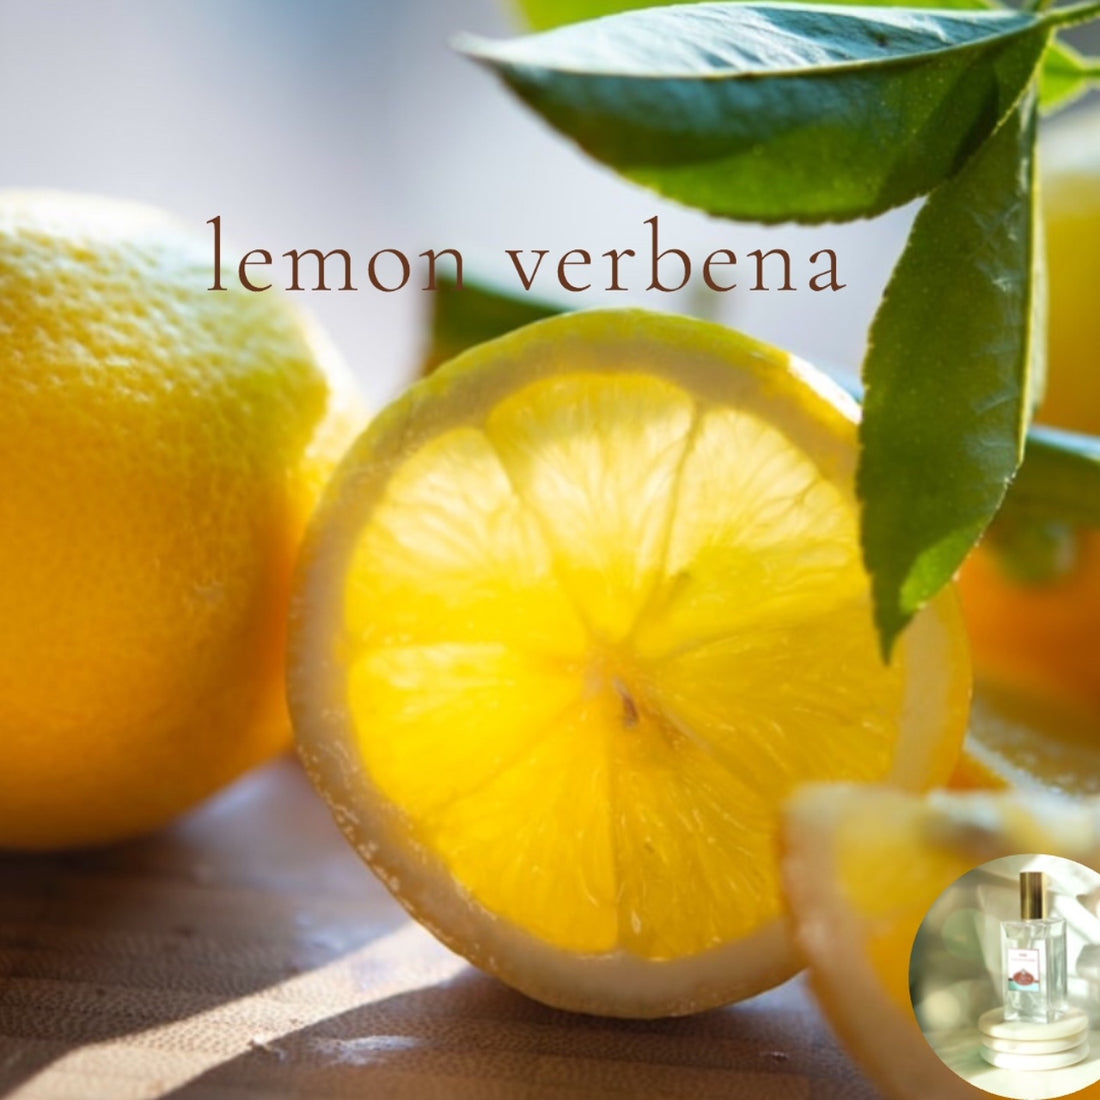 LEMON VERBENA scented Room and Body Spray - Buy 2 Get 2 for 50% off deal